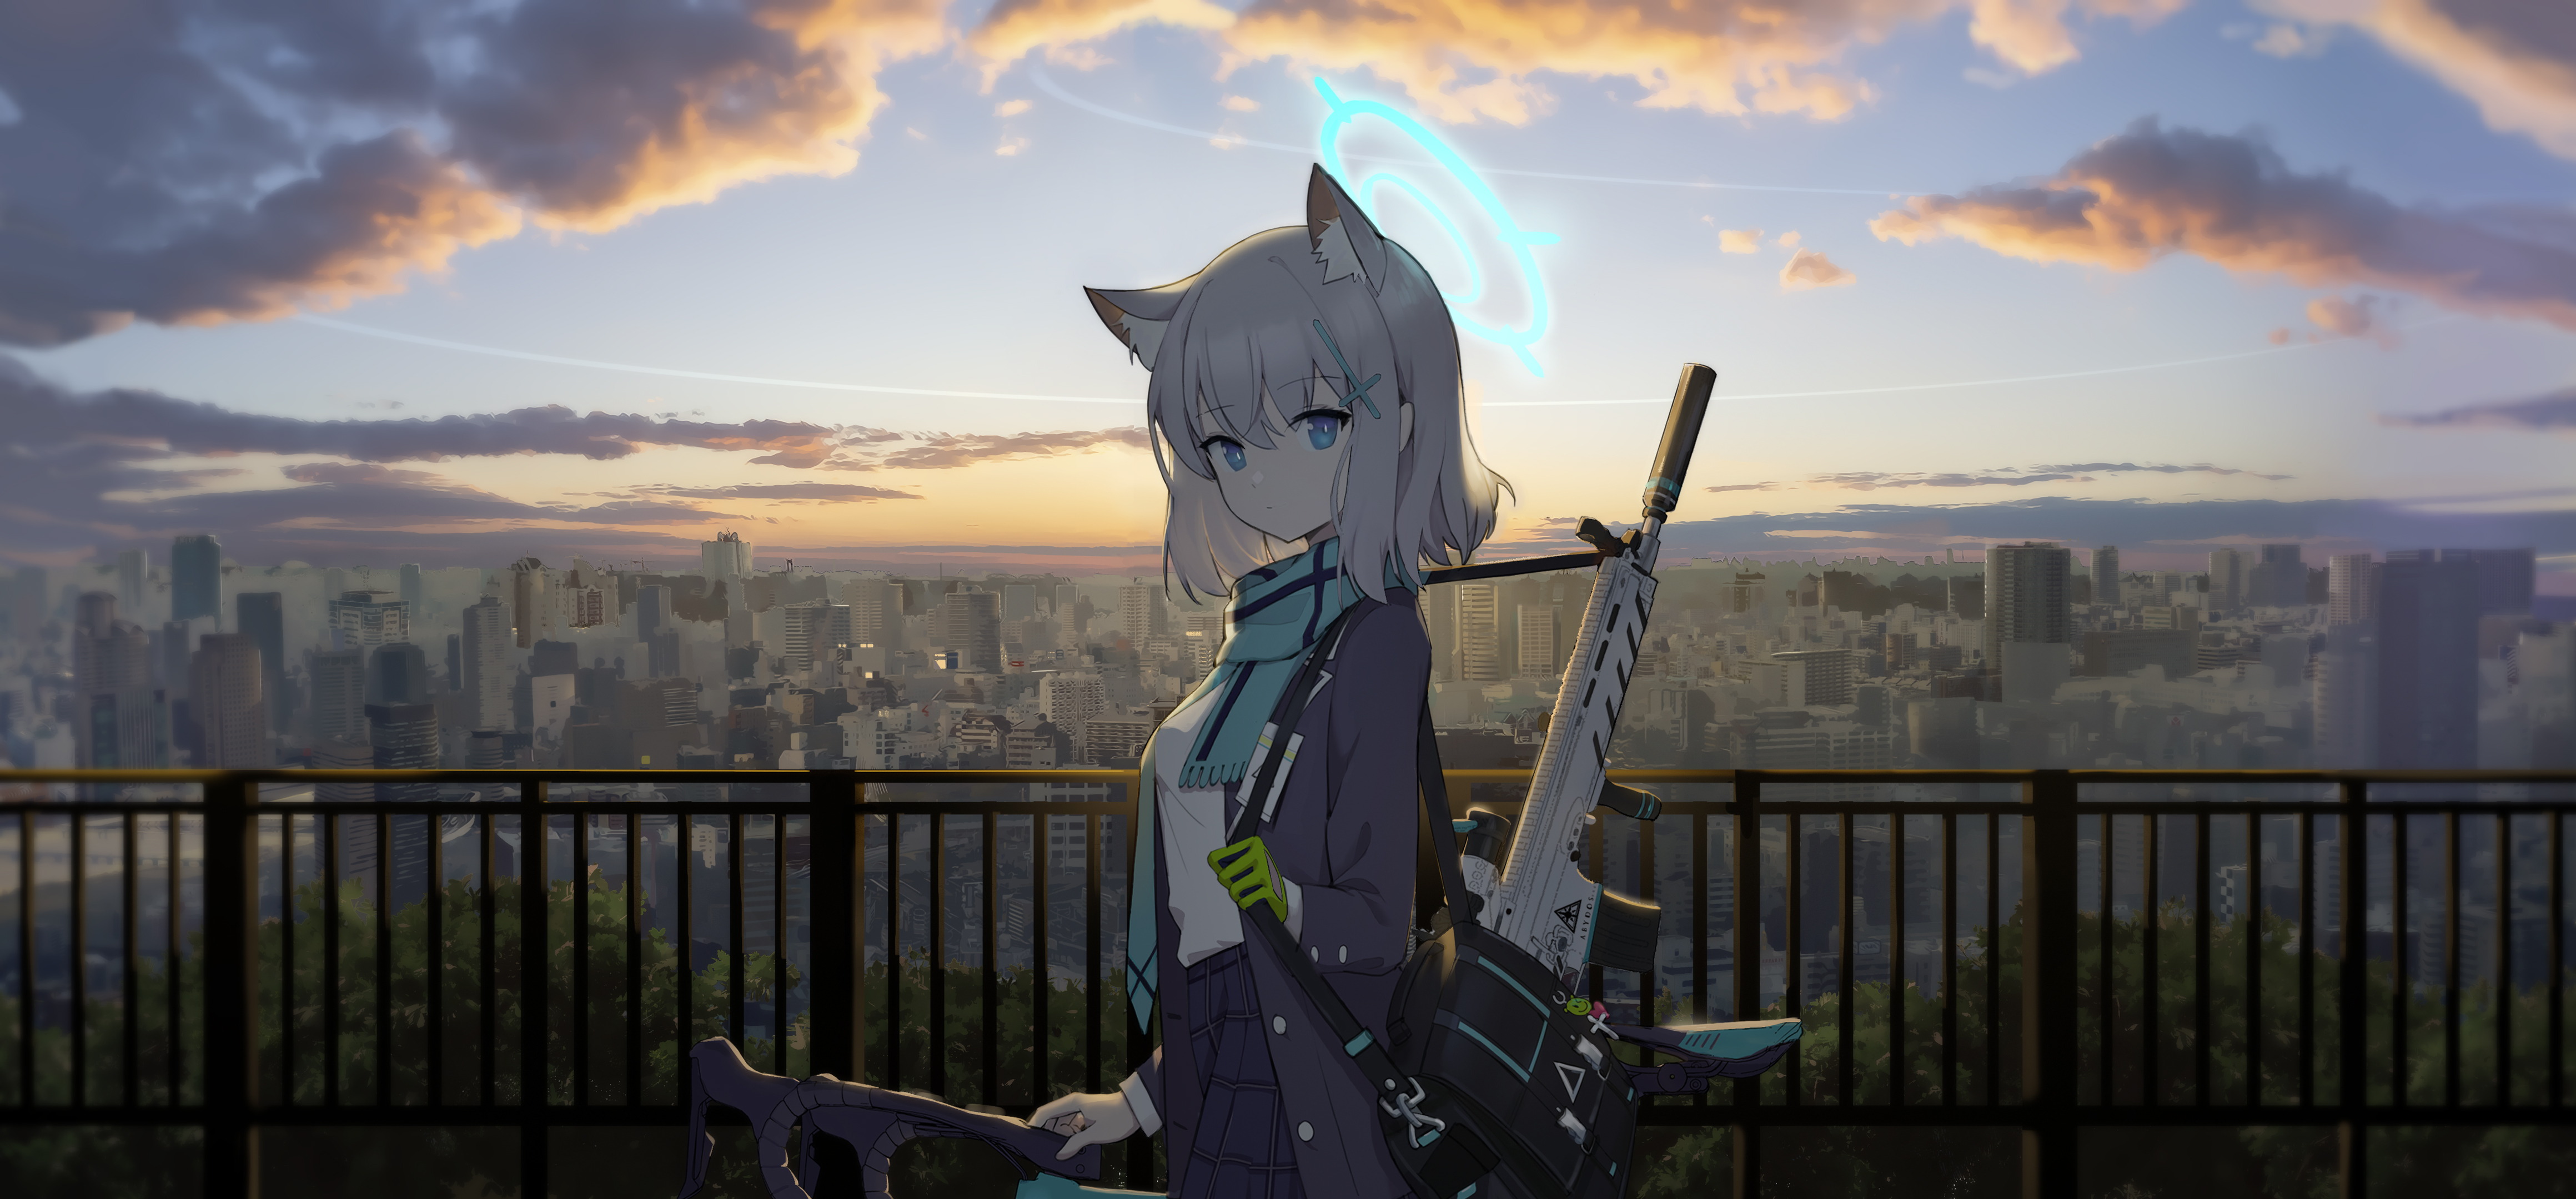 Anime Girls Blue Archive Shiroko Blue Archive Animal Ears Grey Hair Blue Eyes Weapon Cityscape 4639x2160